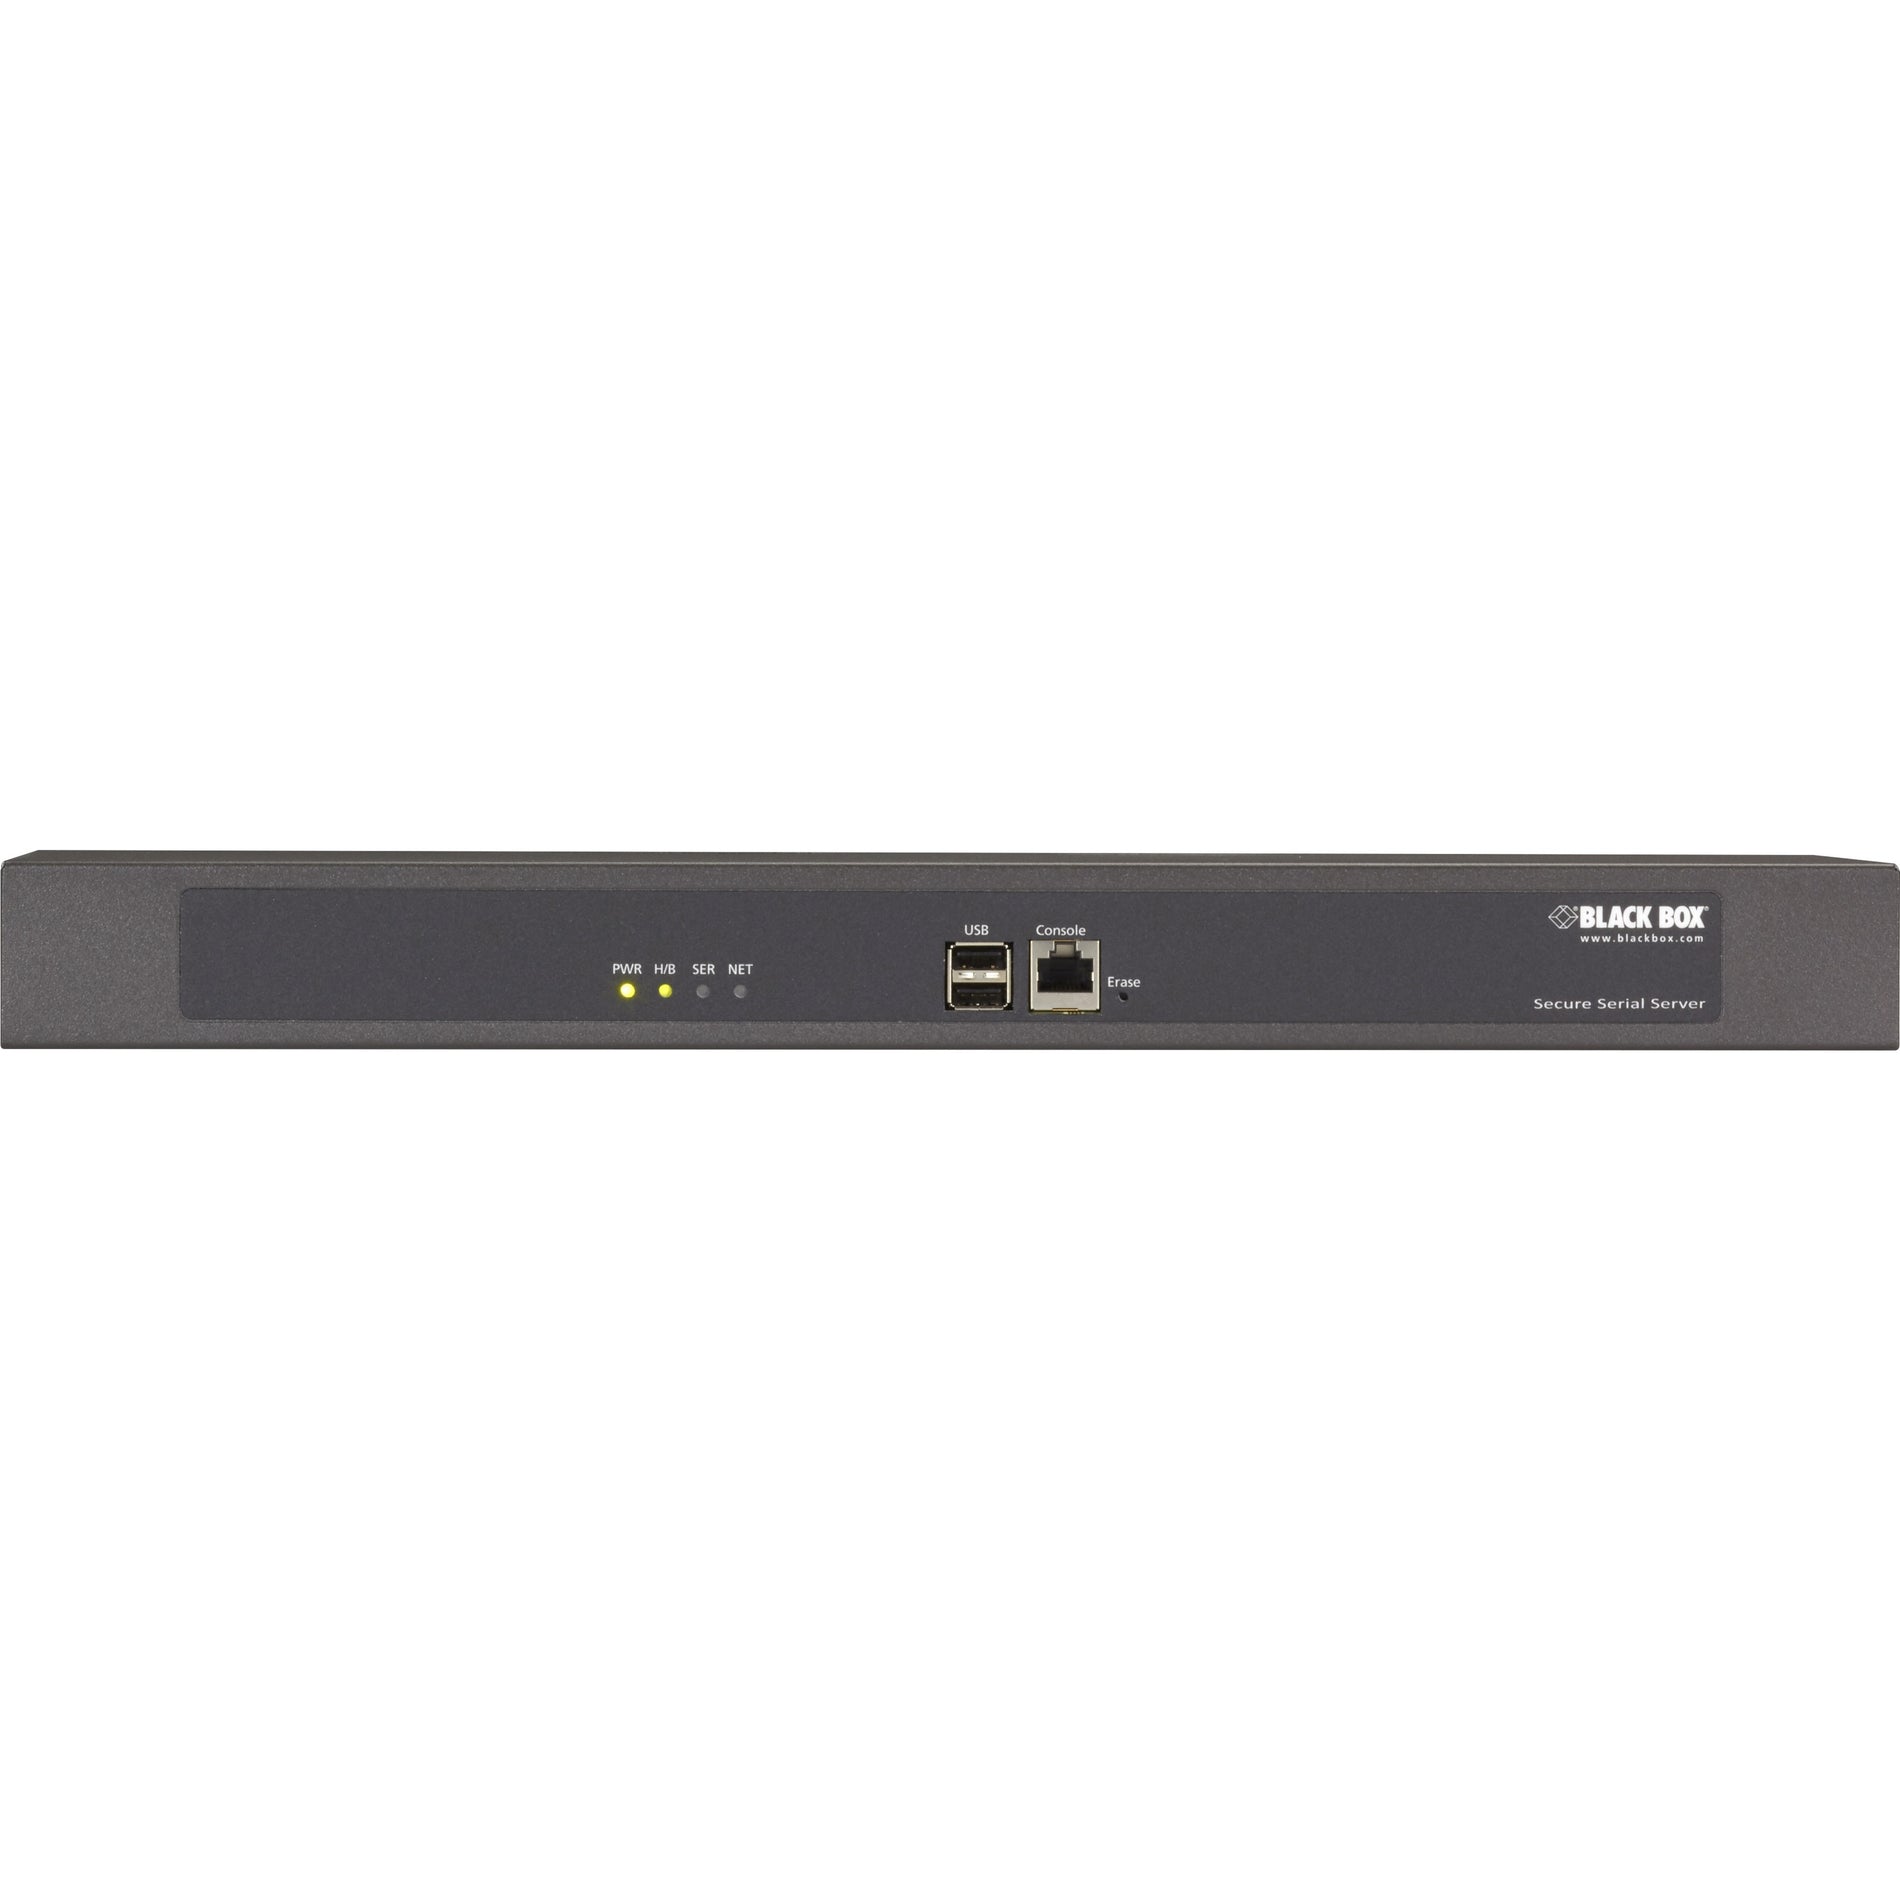 Black Box LES1532A LES1500 Device Server, 32-Port Secure Serial Server with Cisco Pinout, Rackmount brackets and hardware, 4 Year Limited Warranty